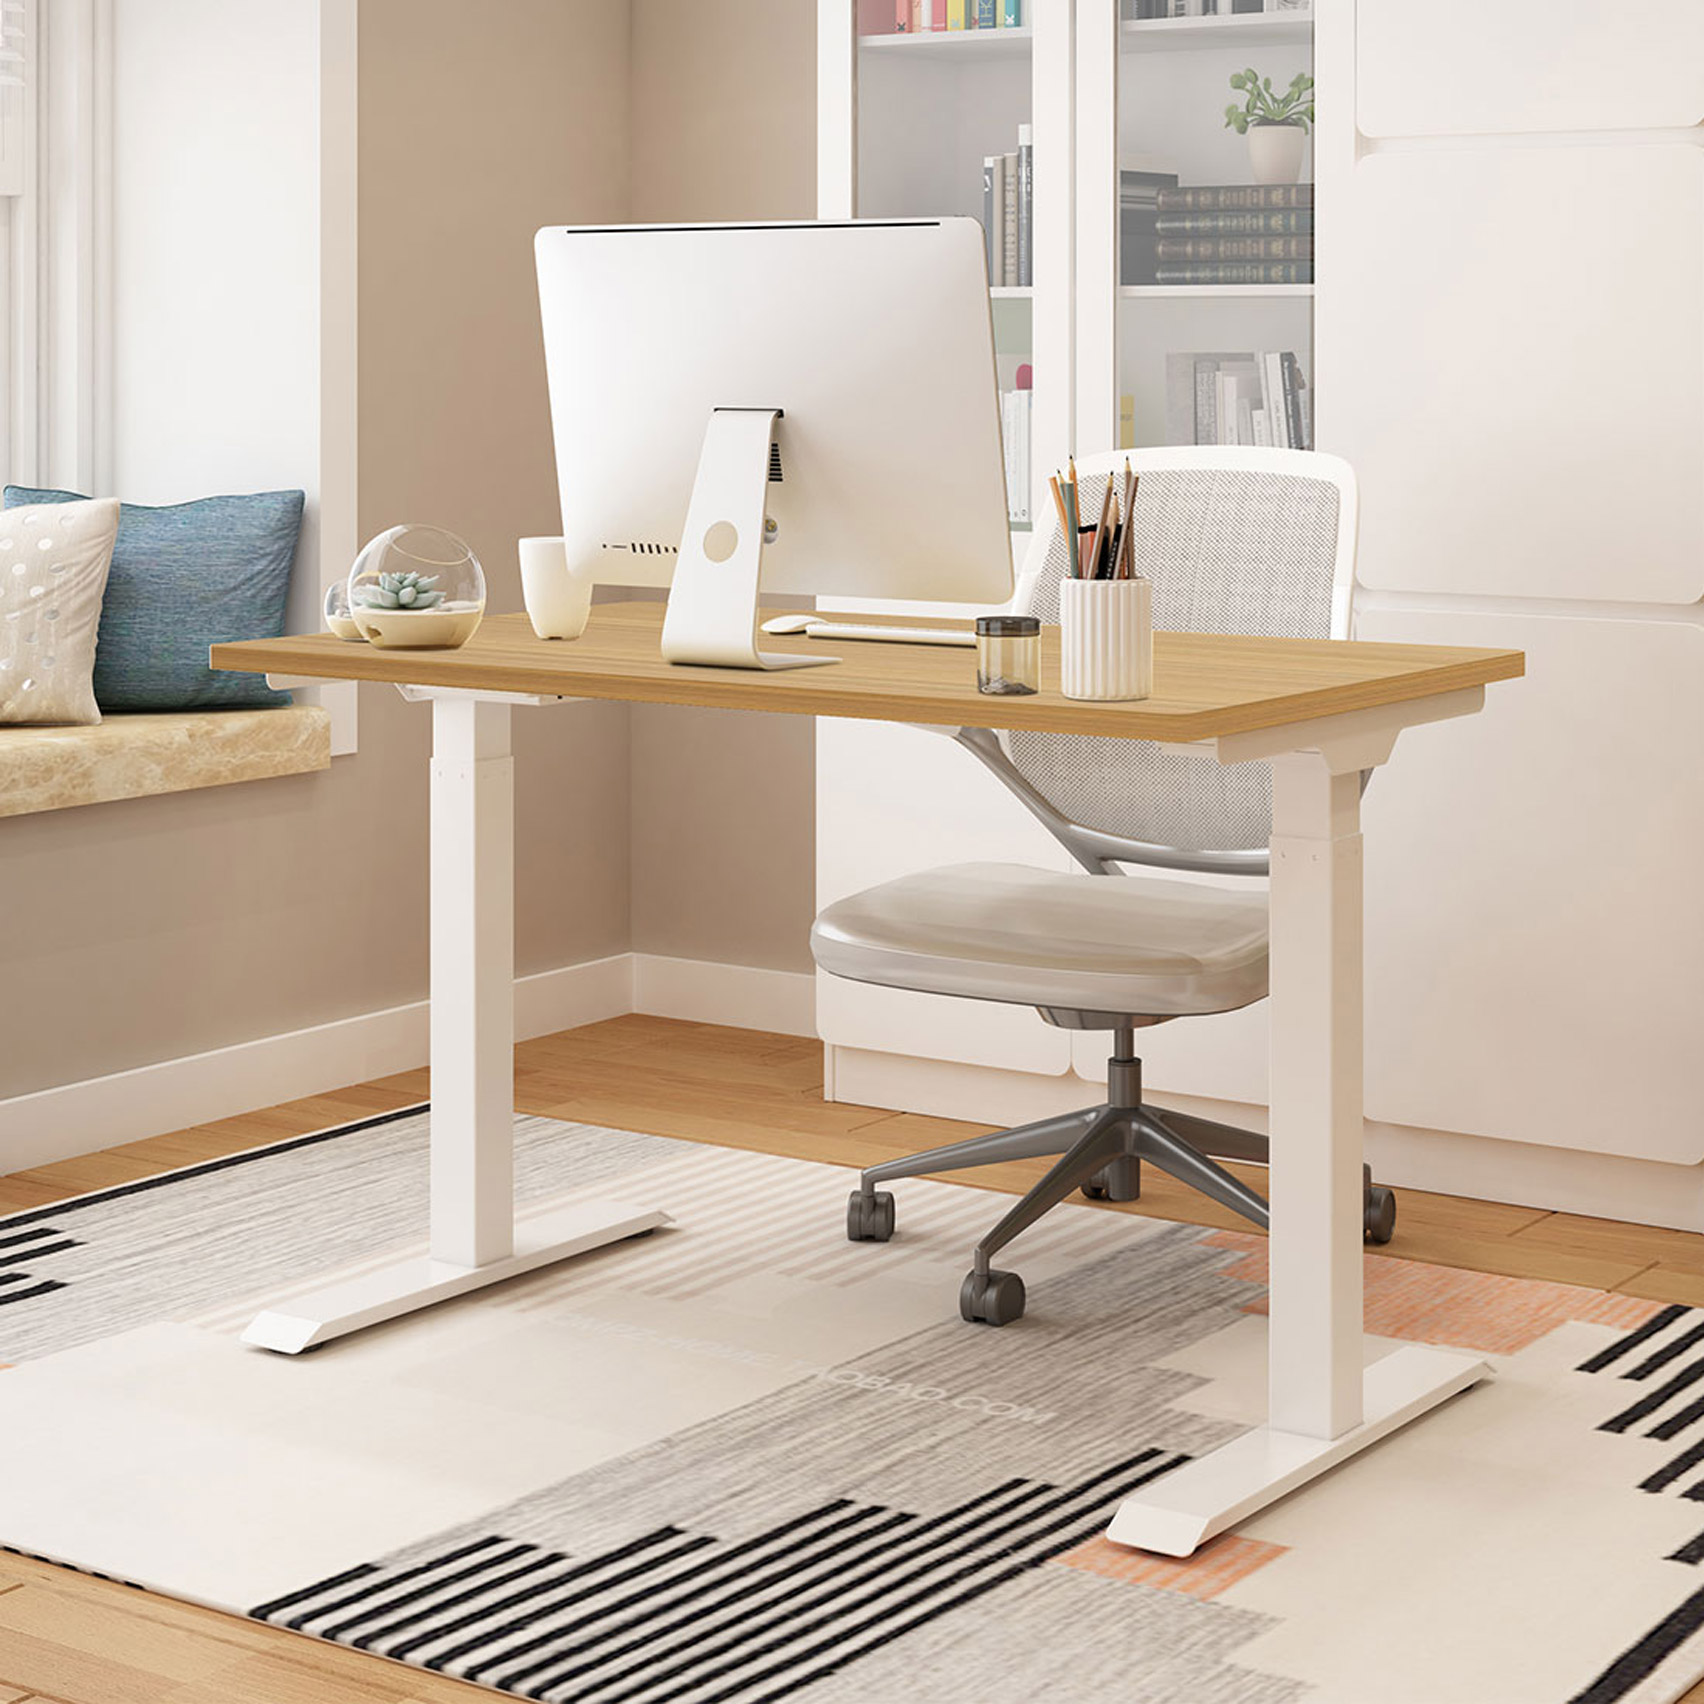 Theodore standing desk with white legs in a neutral-toned home office